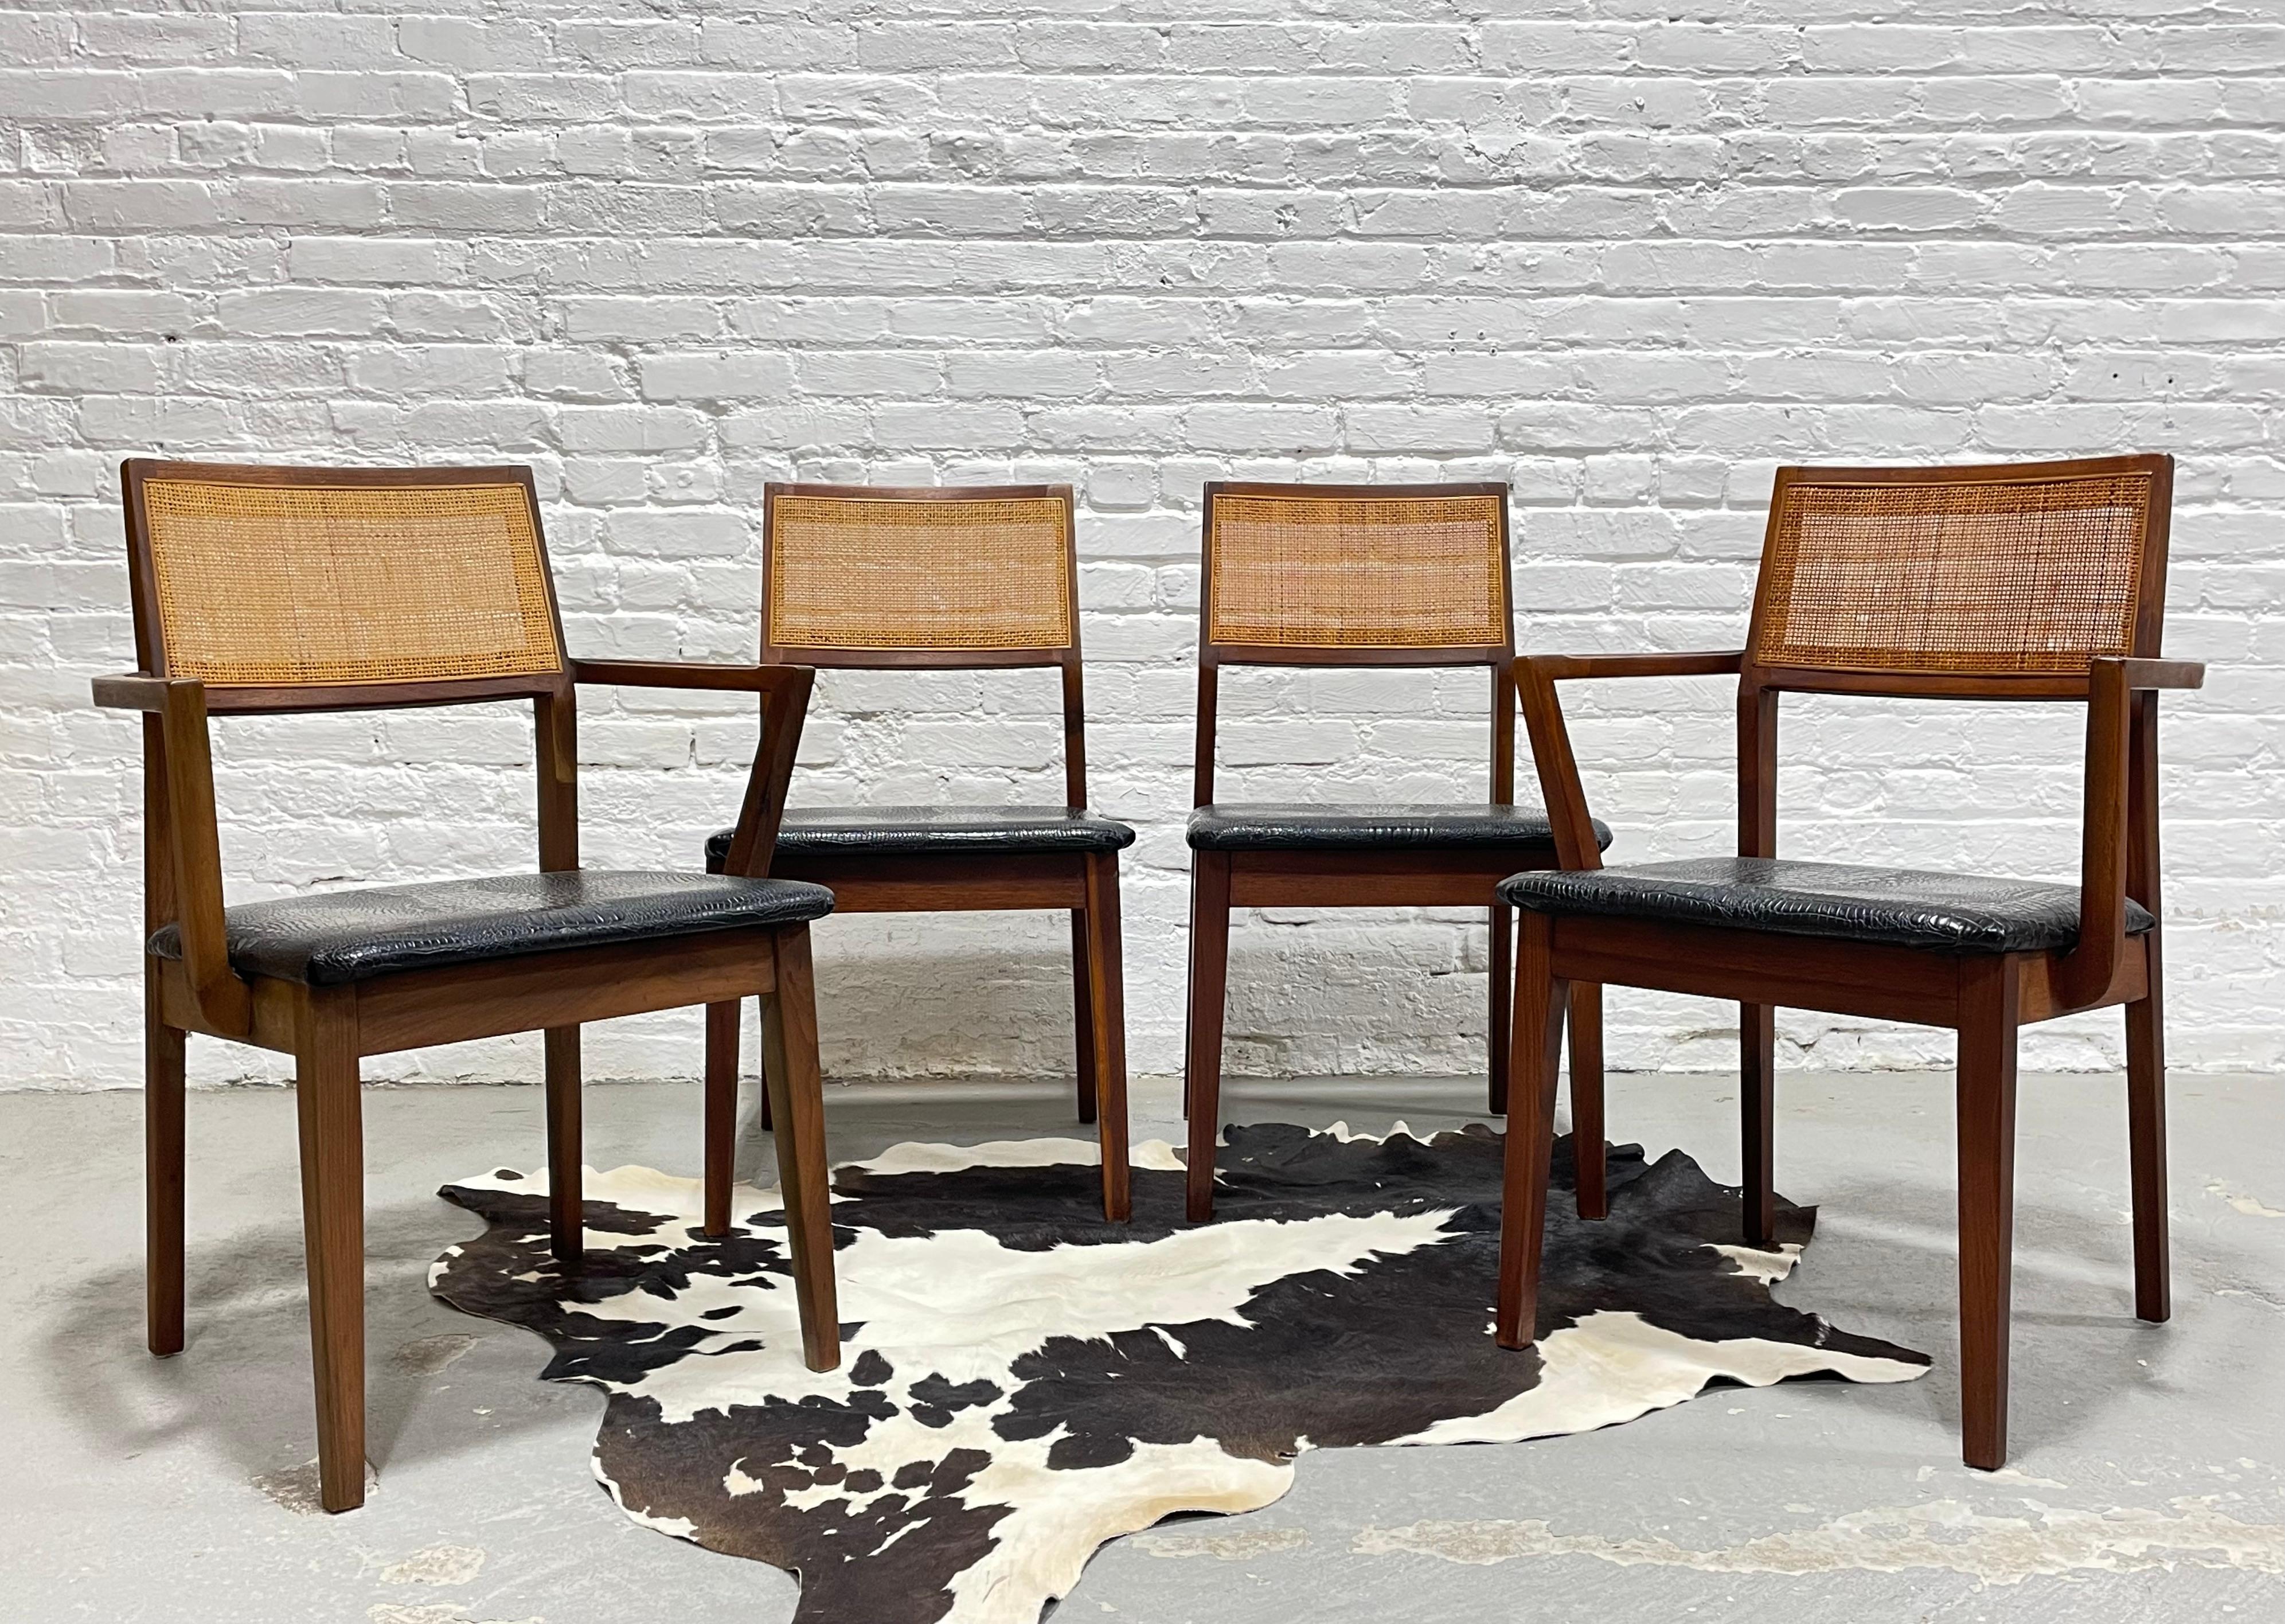 Set of four Mid Century Modern Walnut Caned Dining Chairs, c. 1960's. Lovely solid frames with incredible wood coloring and caned back rests. Upholstery is a black naugahyde which easily matches with everything and is in nice condition. A few small